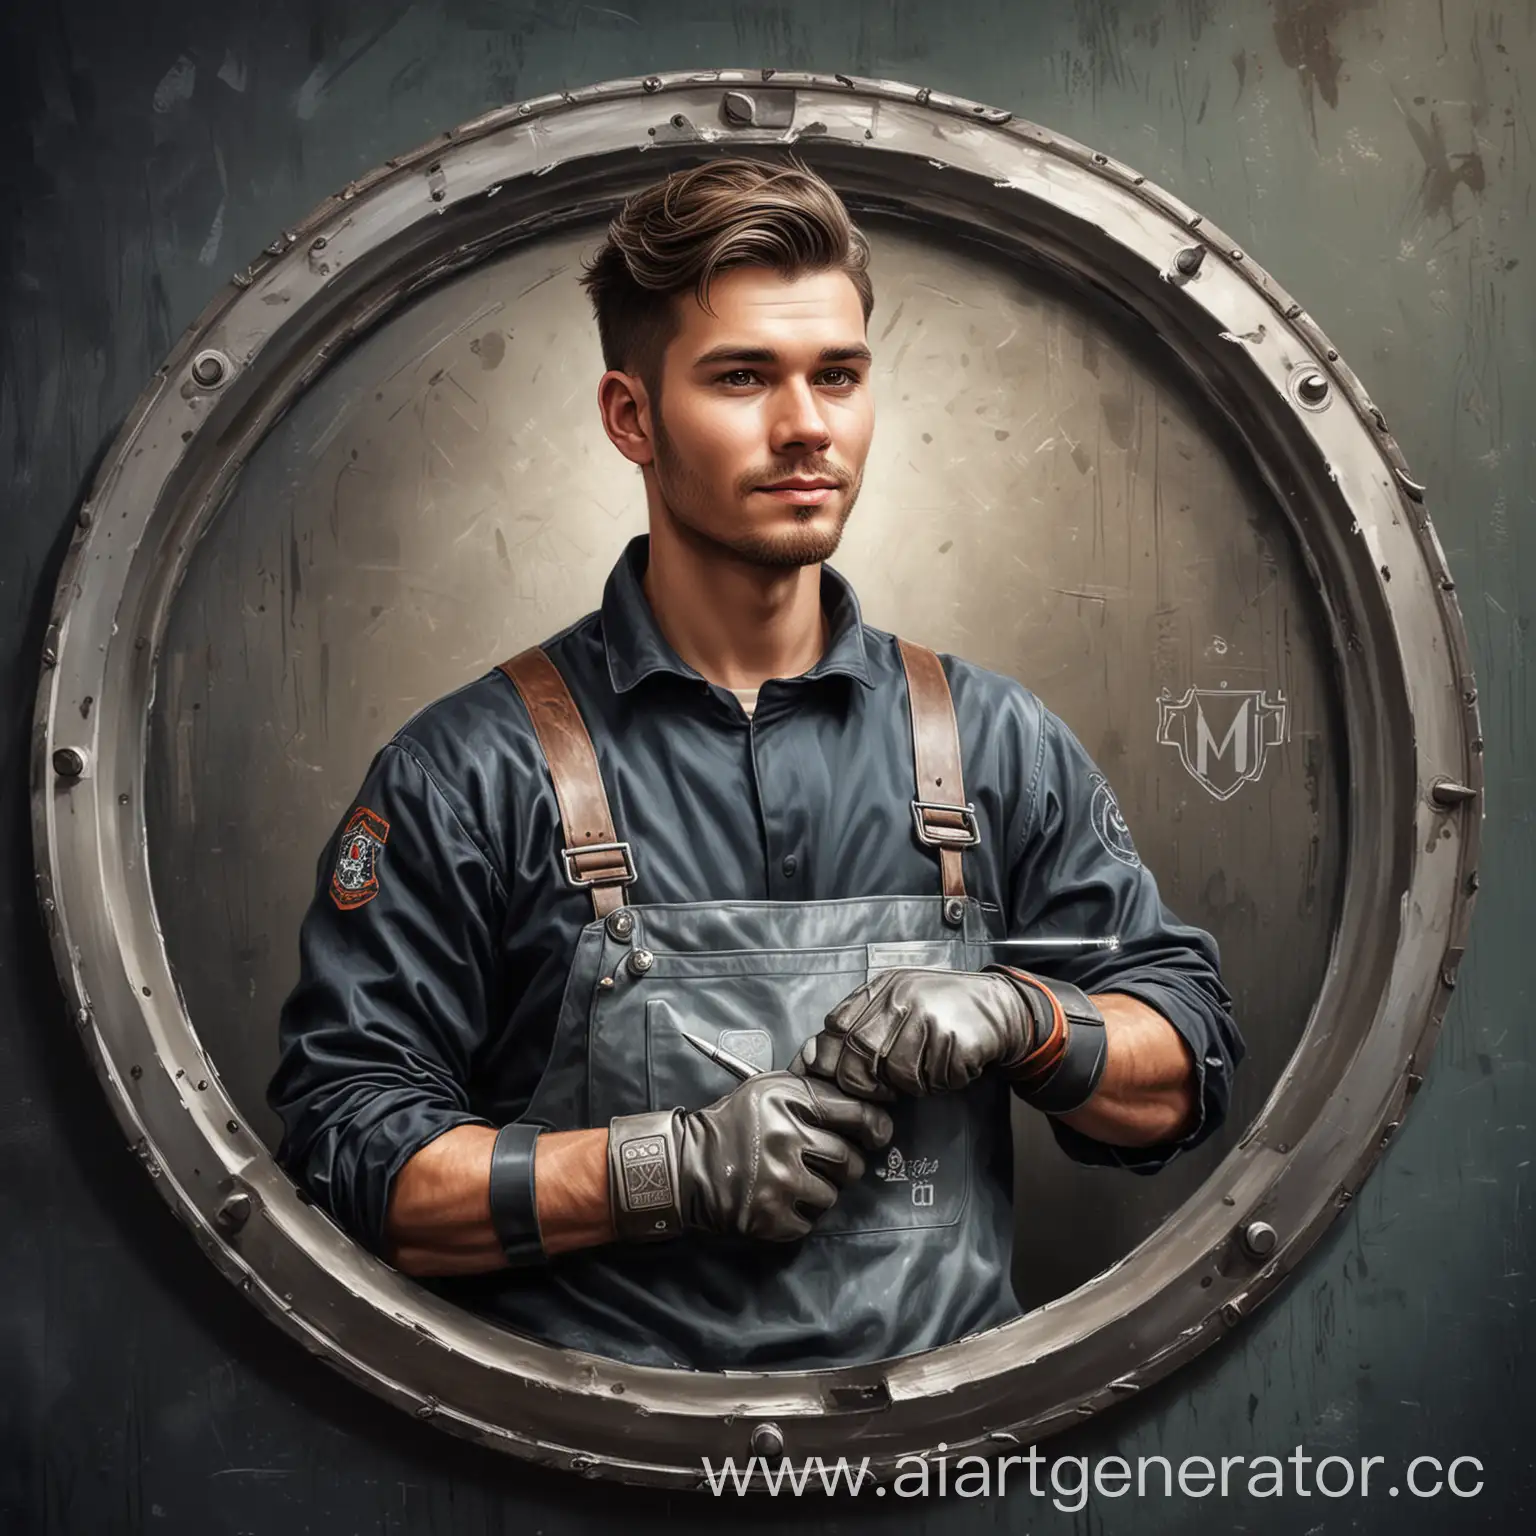 Handsome-Sporty-Welder-with-Iron-Products-Emblem-MMI